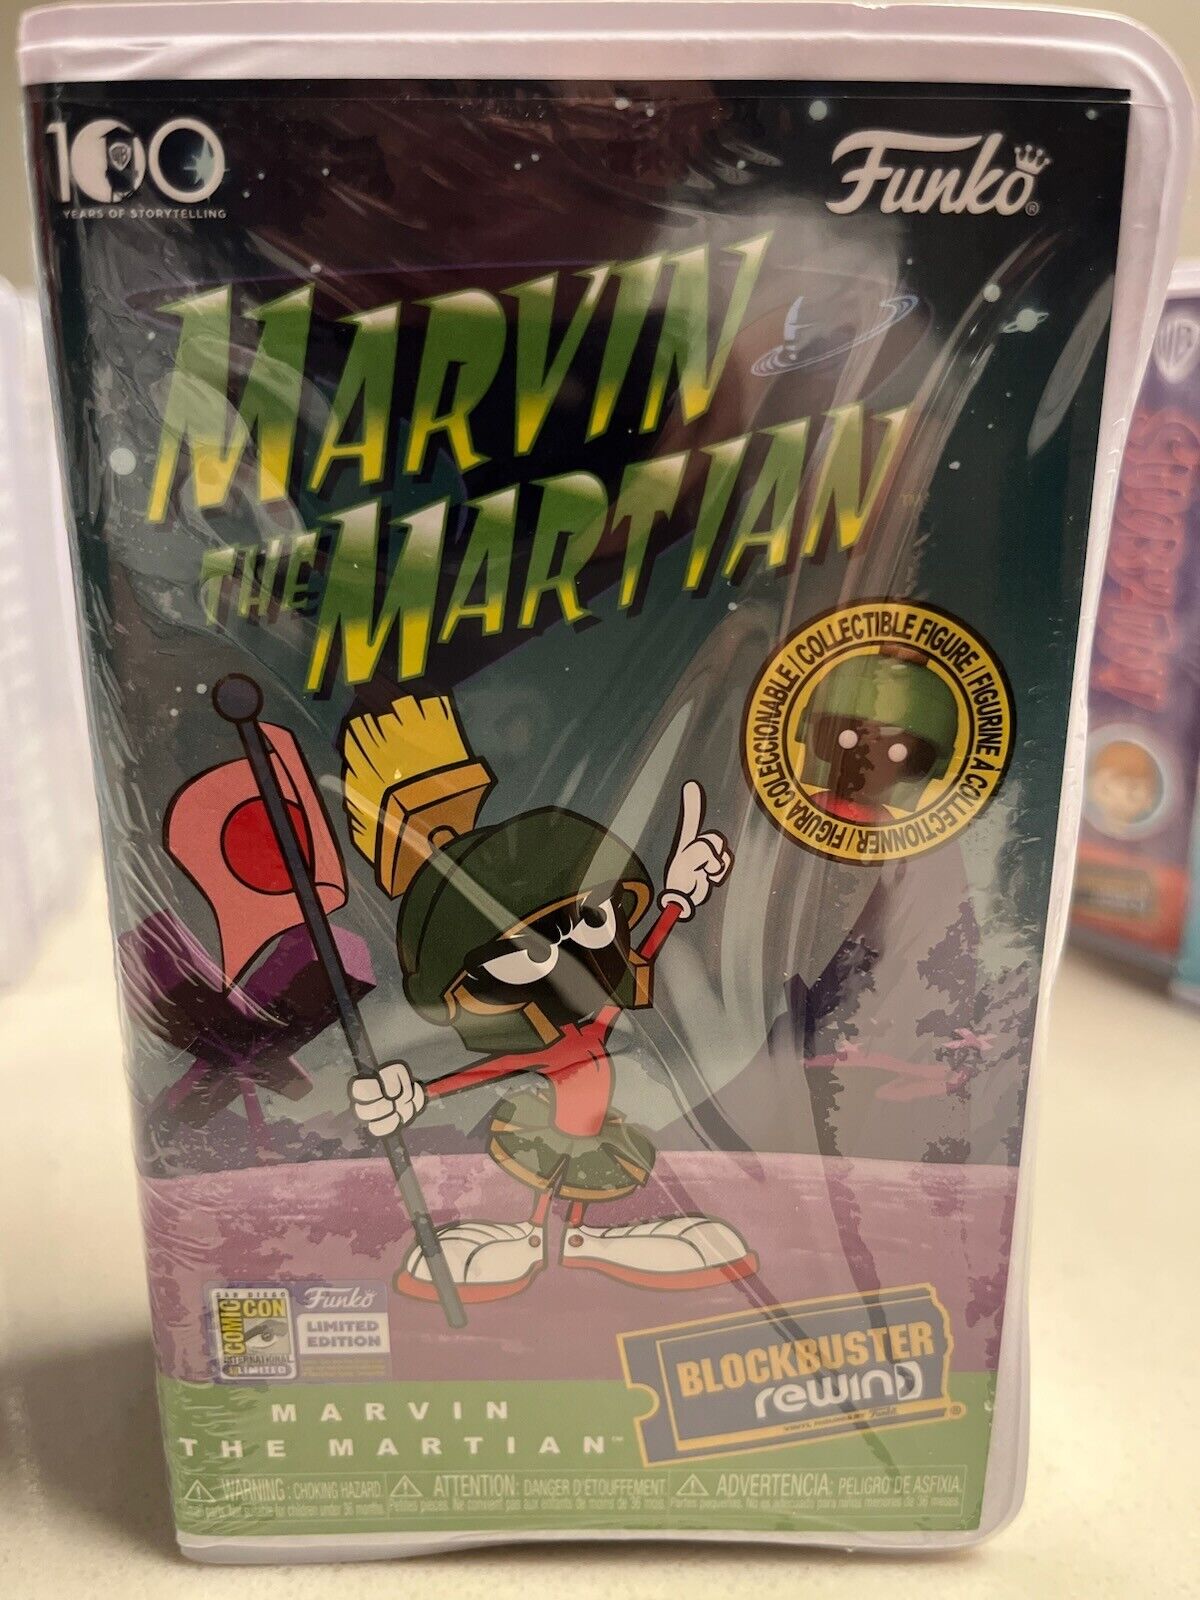 SDCC 2023 Exclusive: Blockbuster Rewind - Marvin the Martian